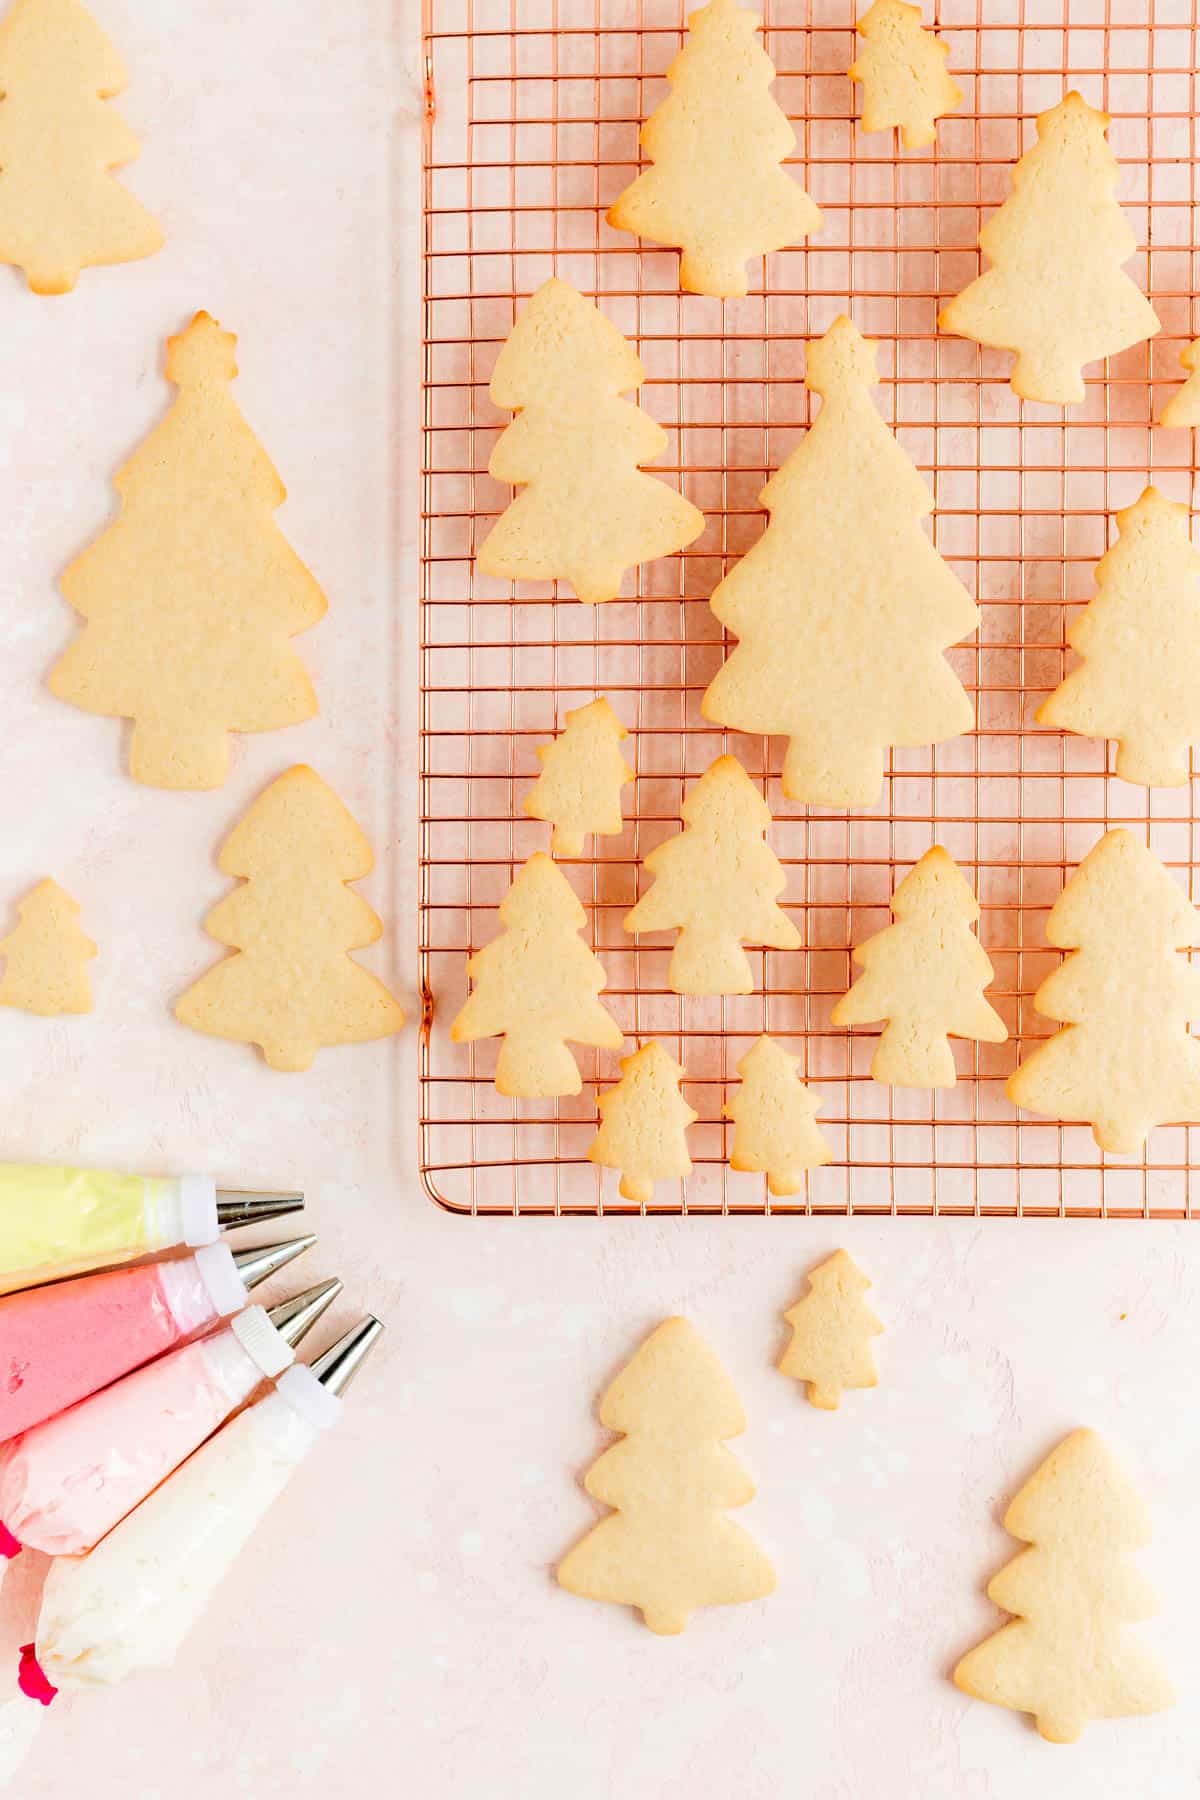 Baked Christmas tree sugar cookies are cooling rack with colored frosting bags